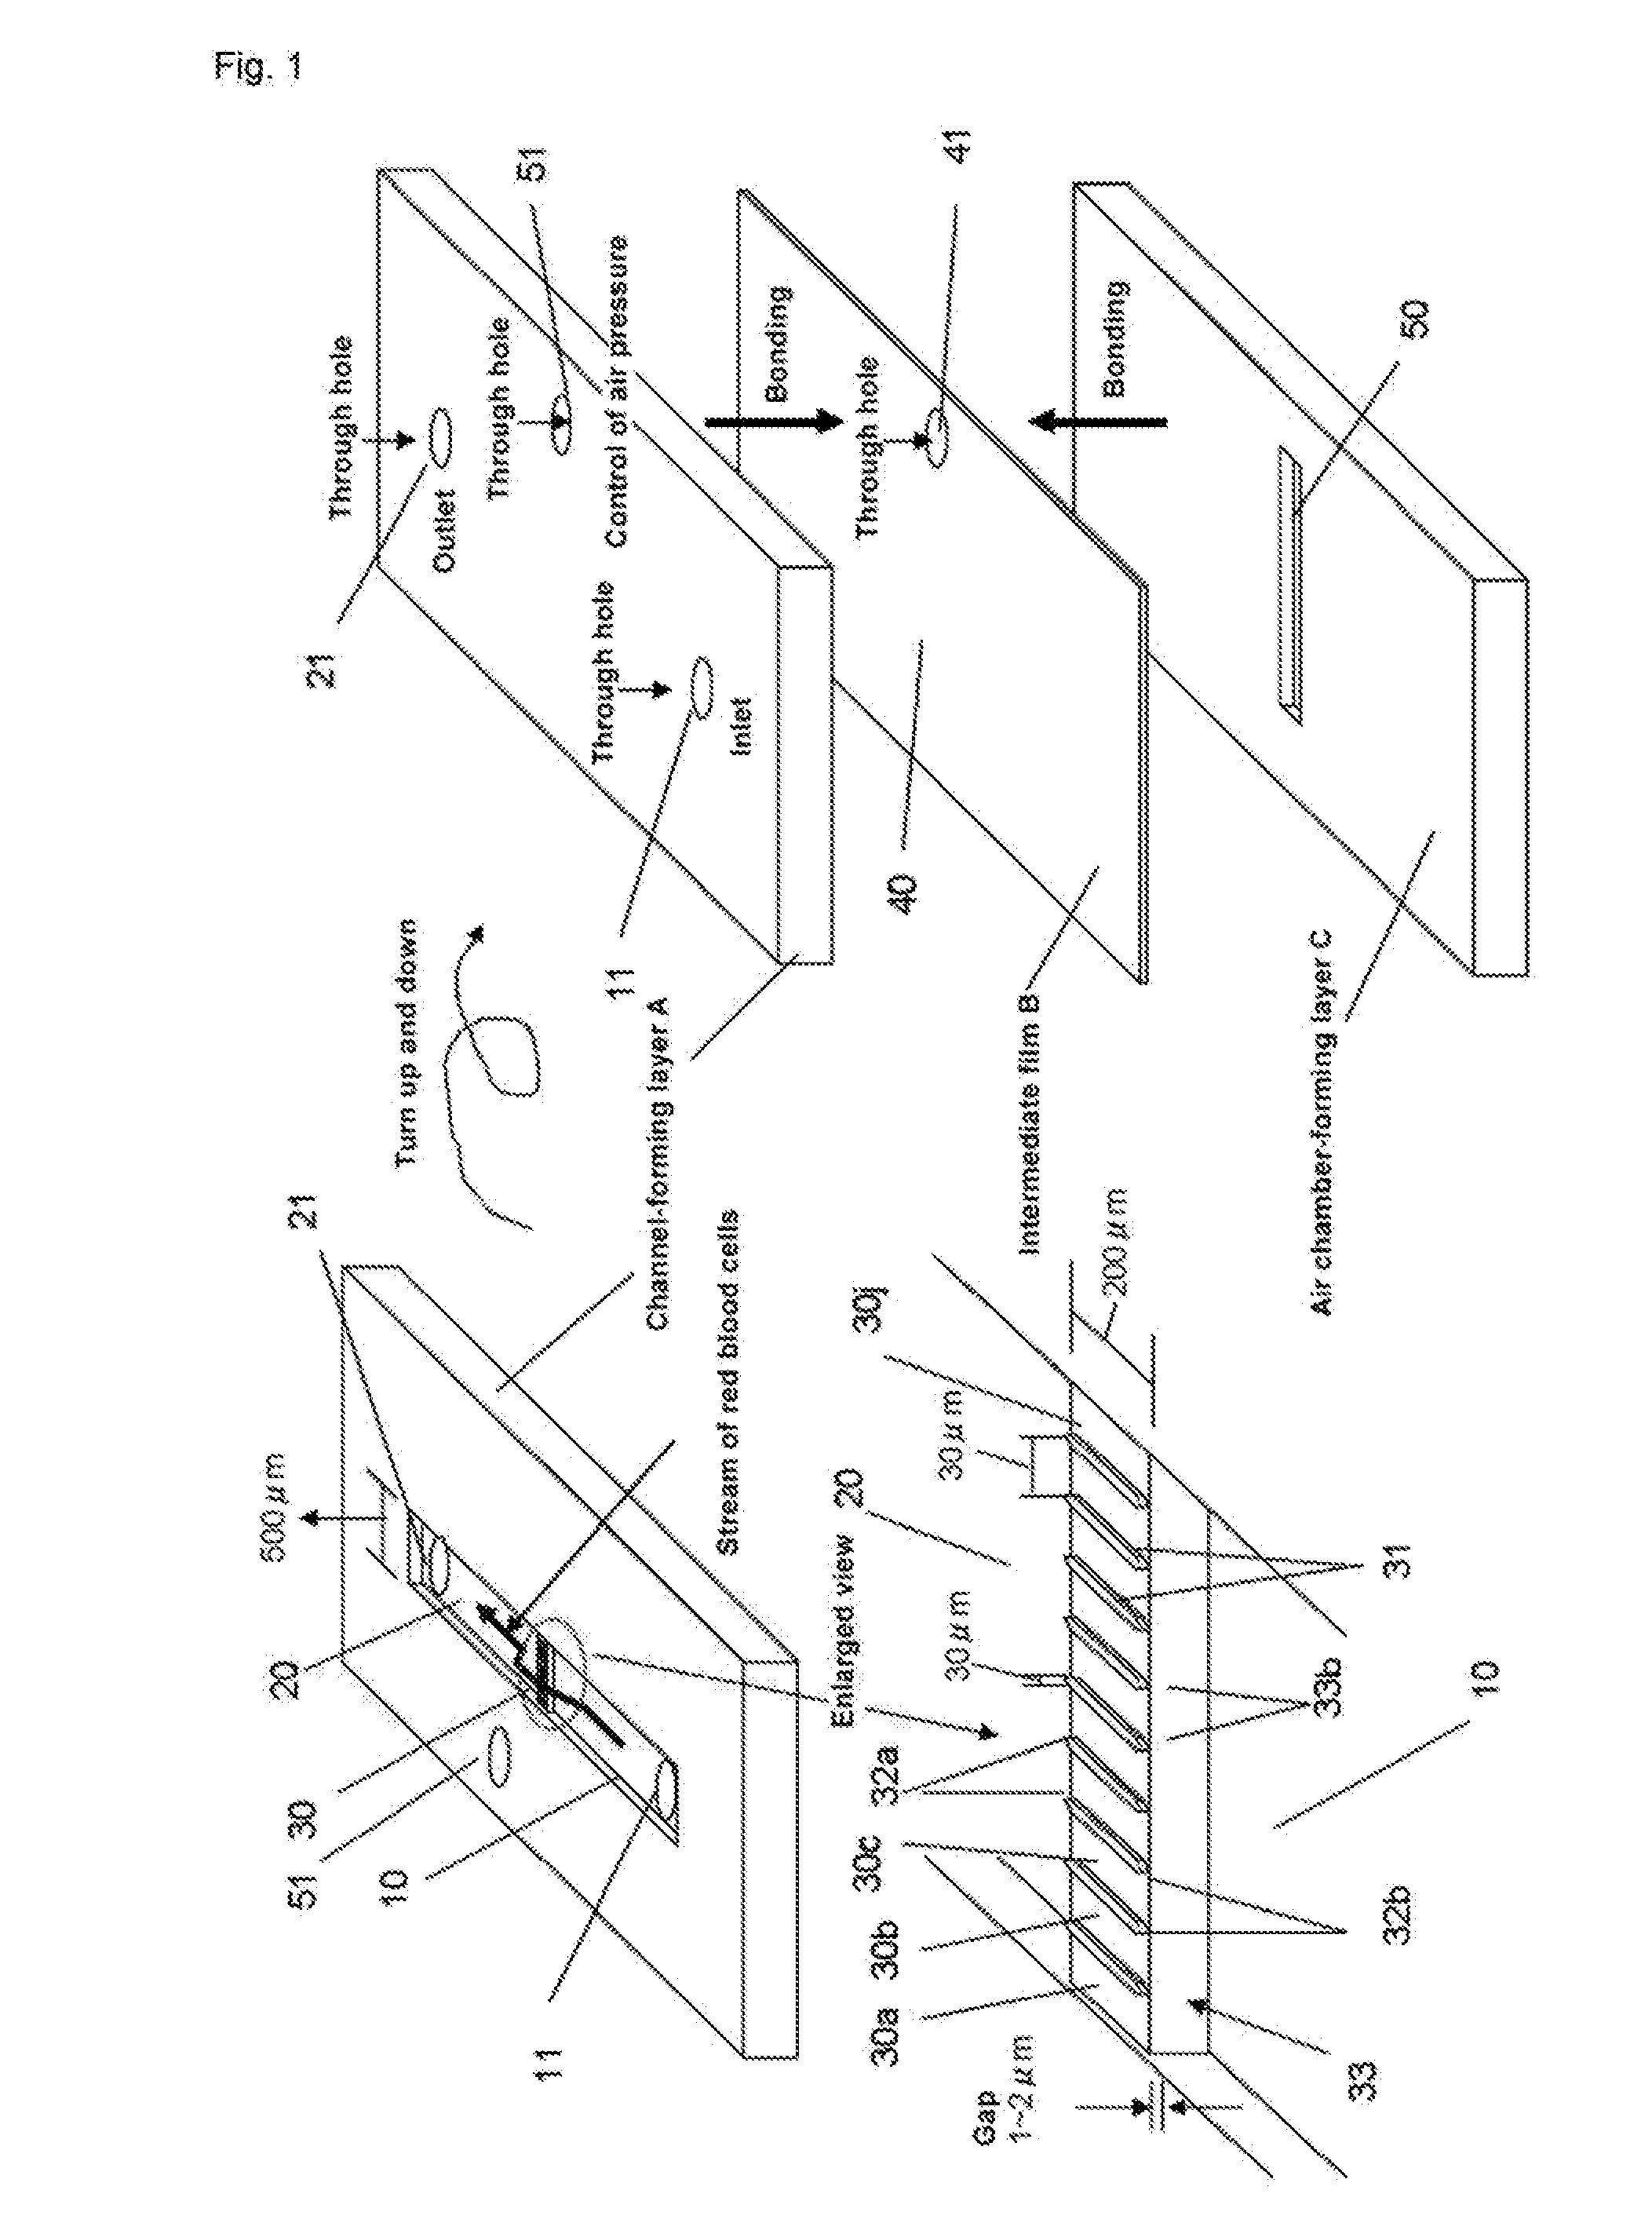 Recovering nucleated red blood cells and method for concentrating and recovering nucleated red blood cells